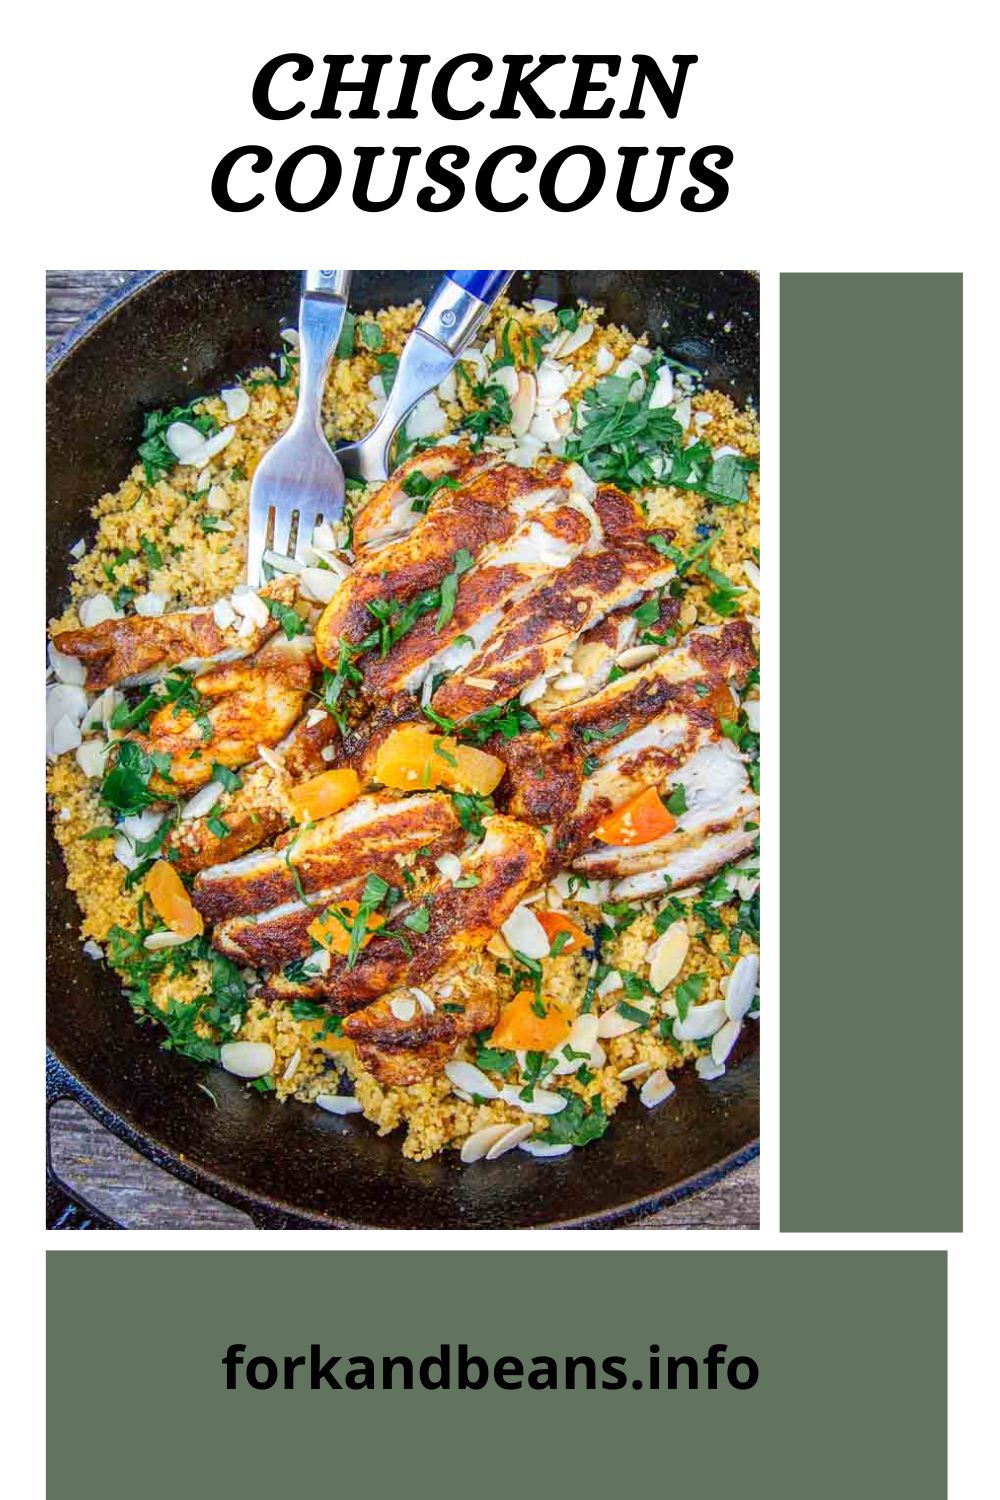 OVER COUSCOUS WITH MOROCCAN SPICED CHICKEN!